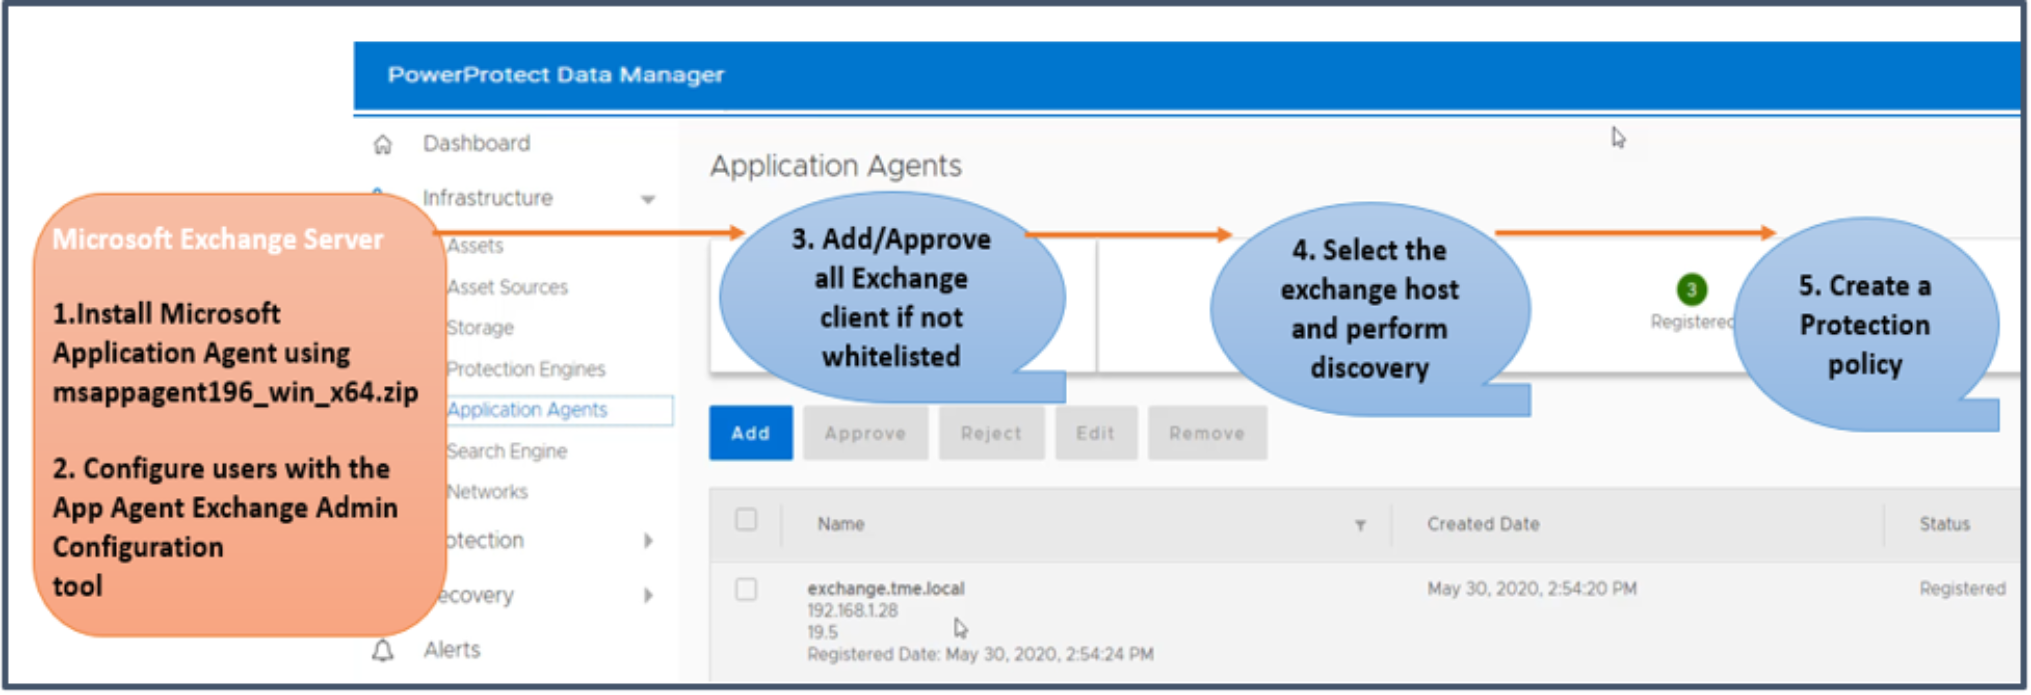 The images shows the steps to install and configure the Microsoft application agent